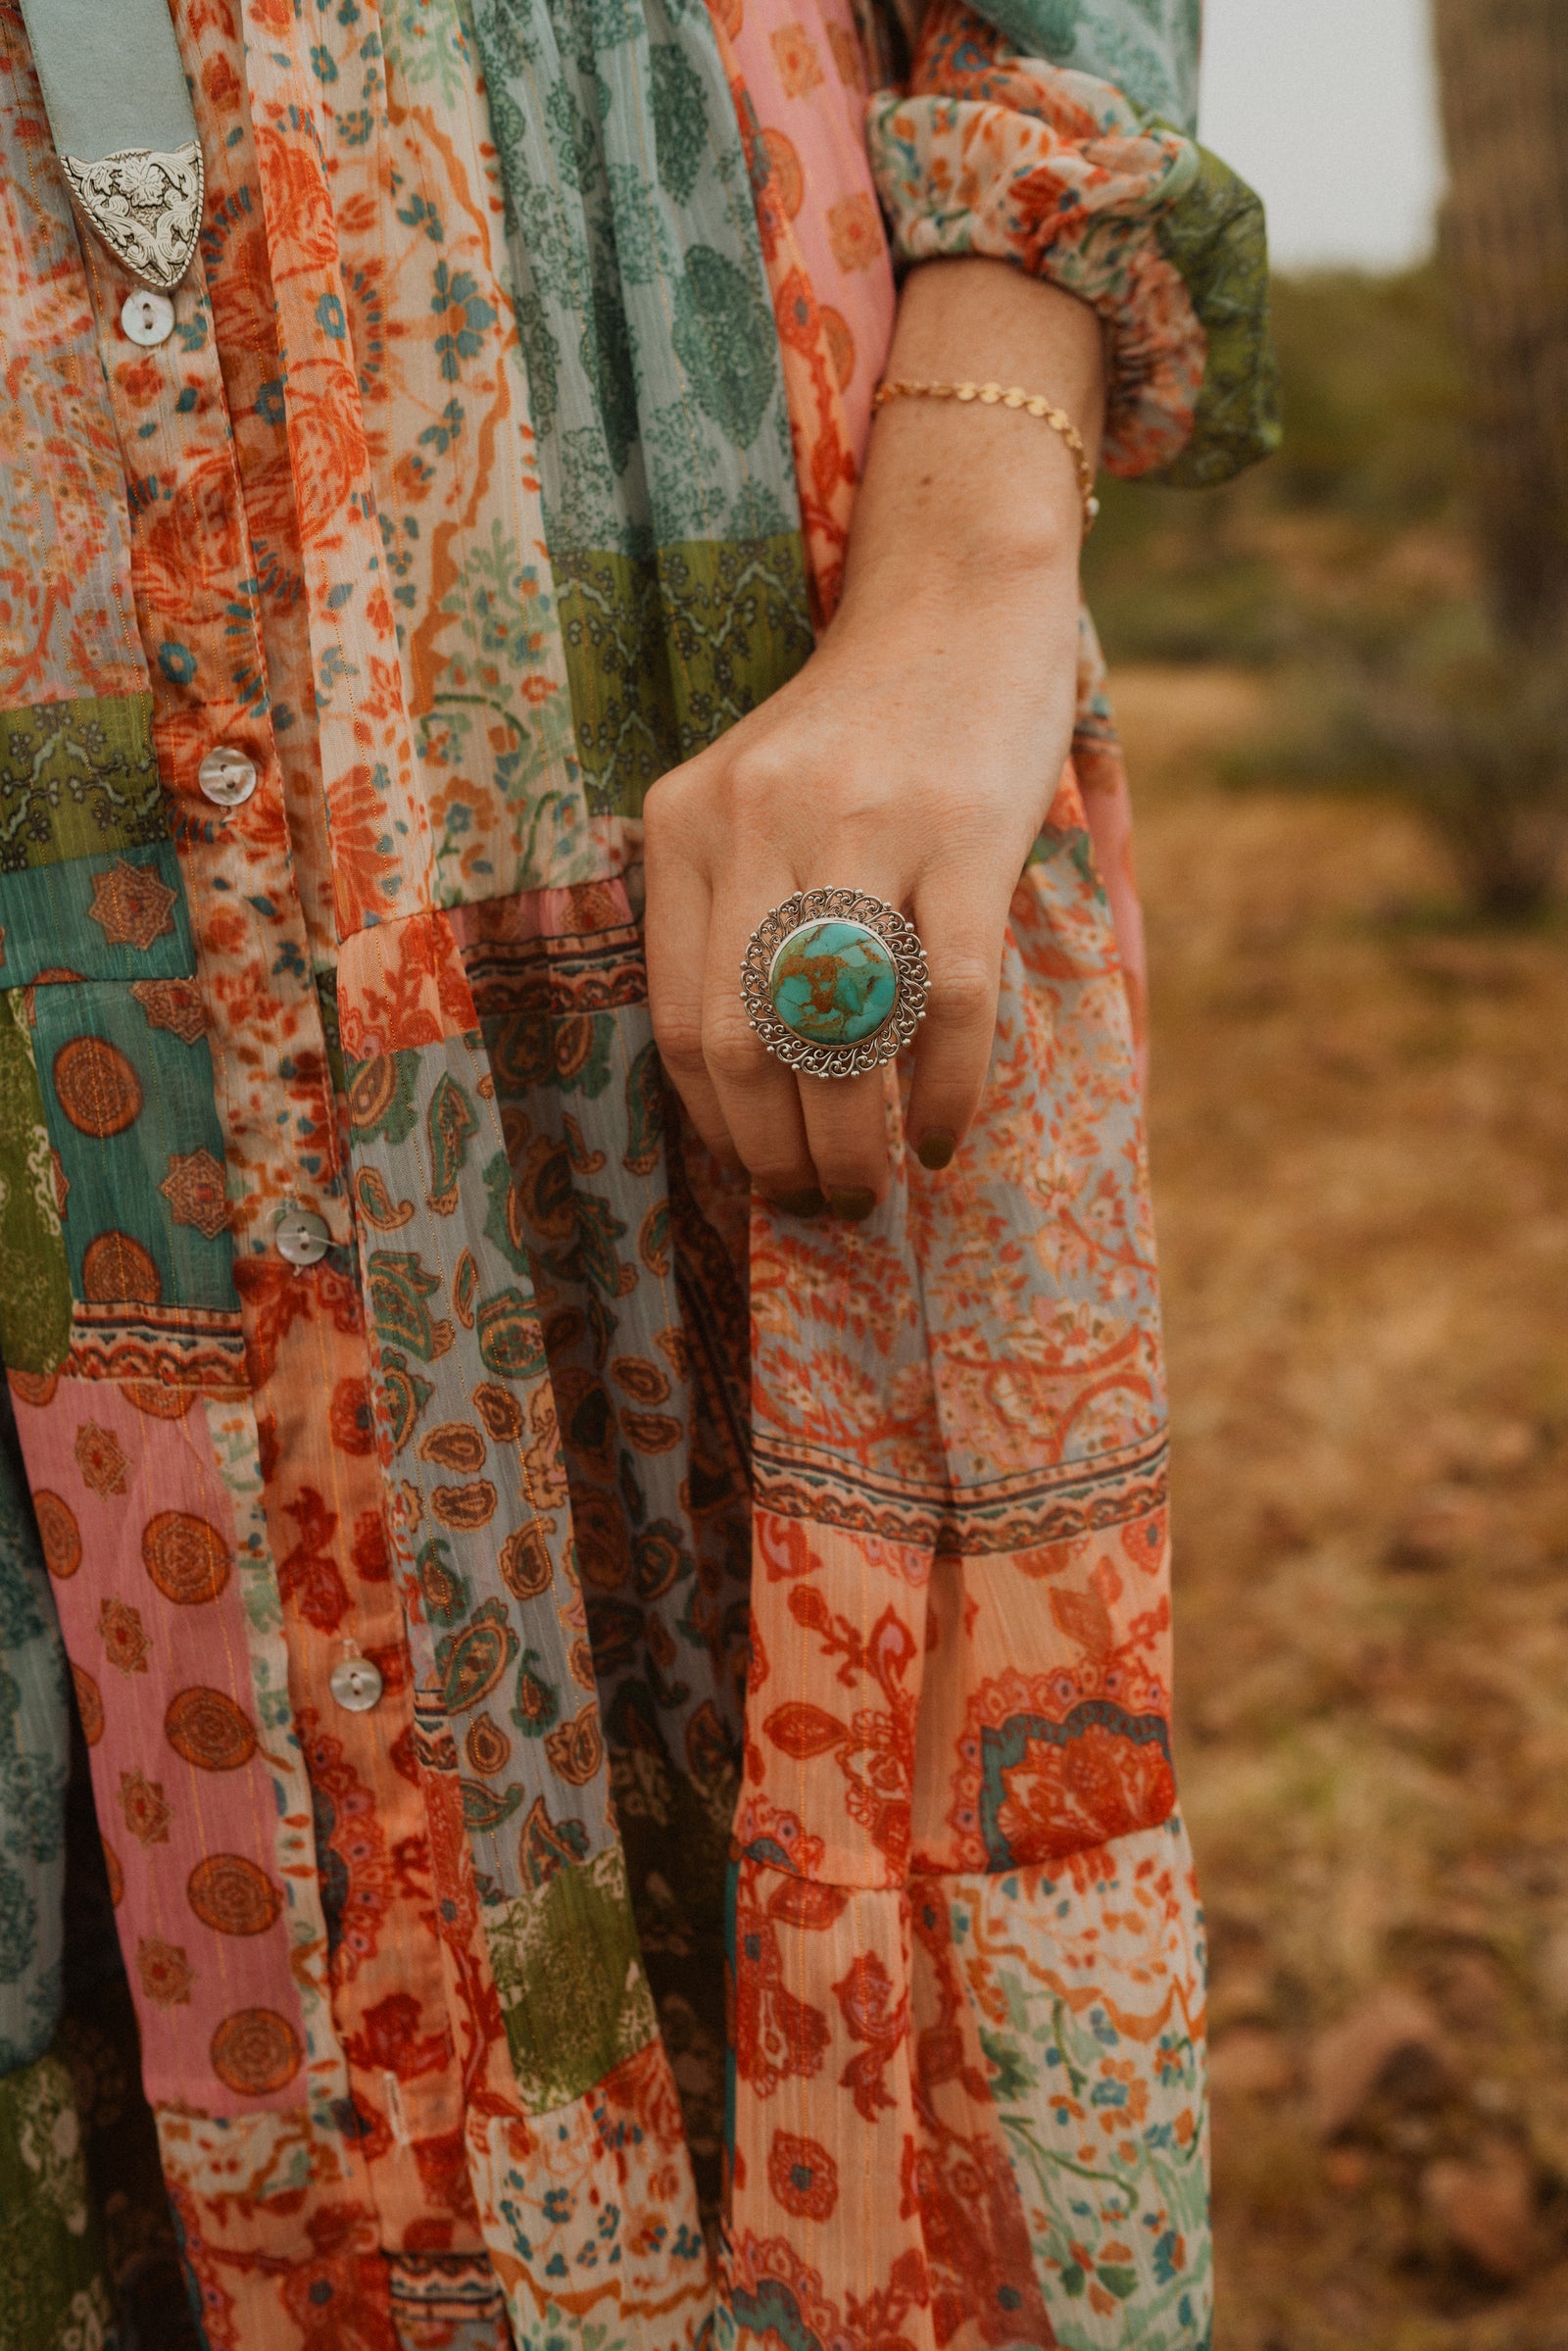 Fancy Ring | Turquoise